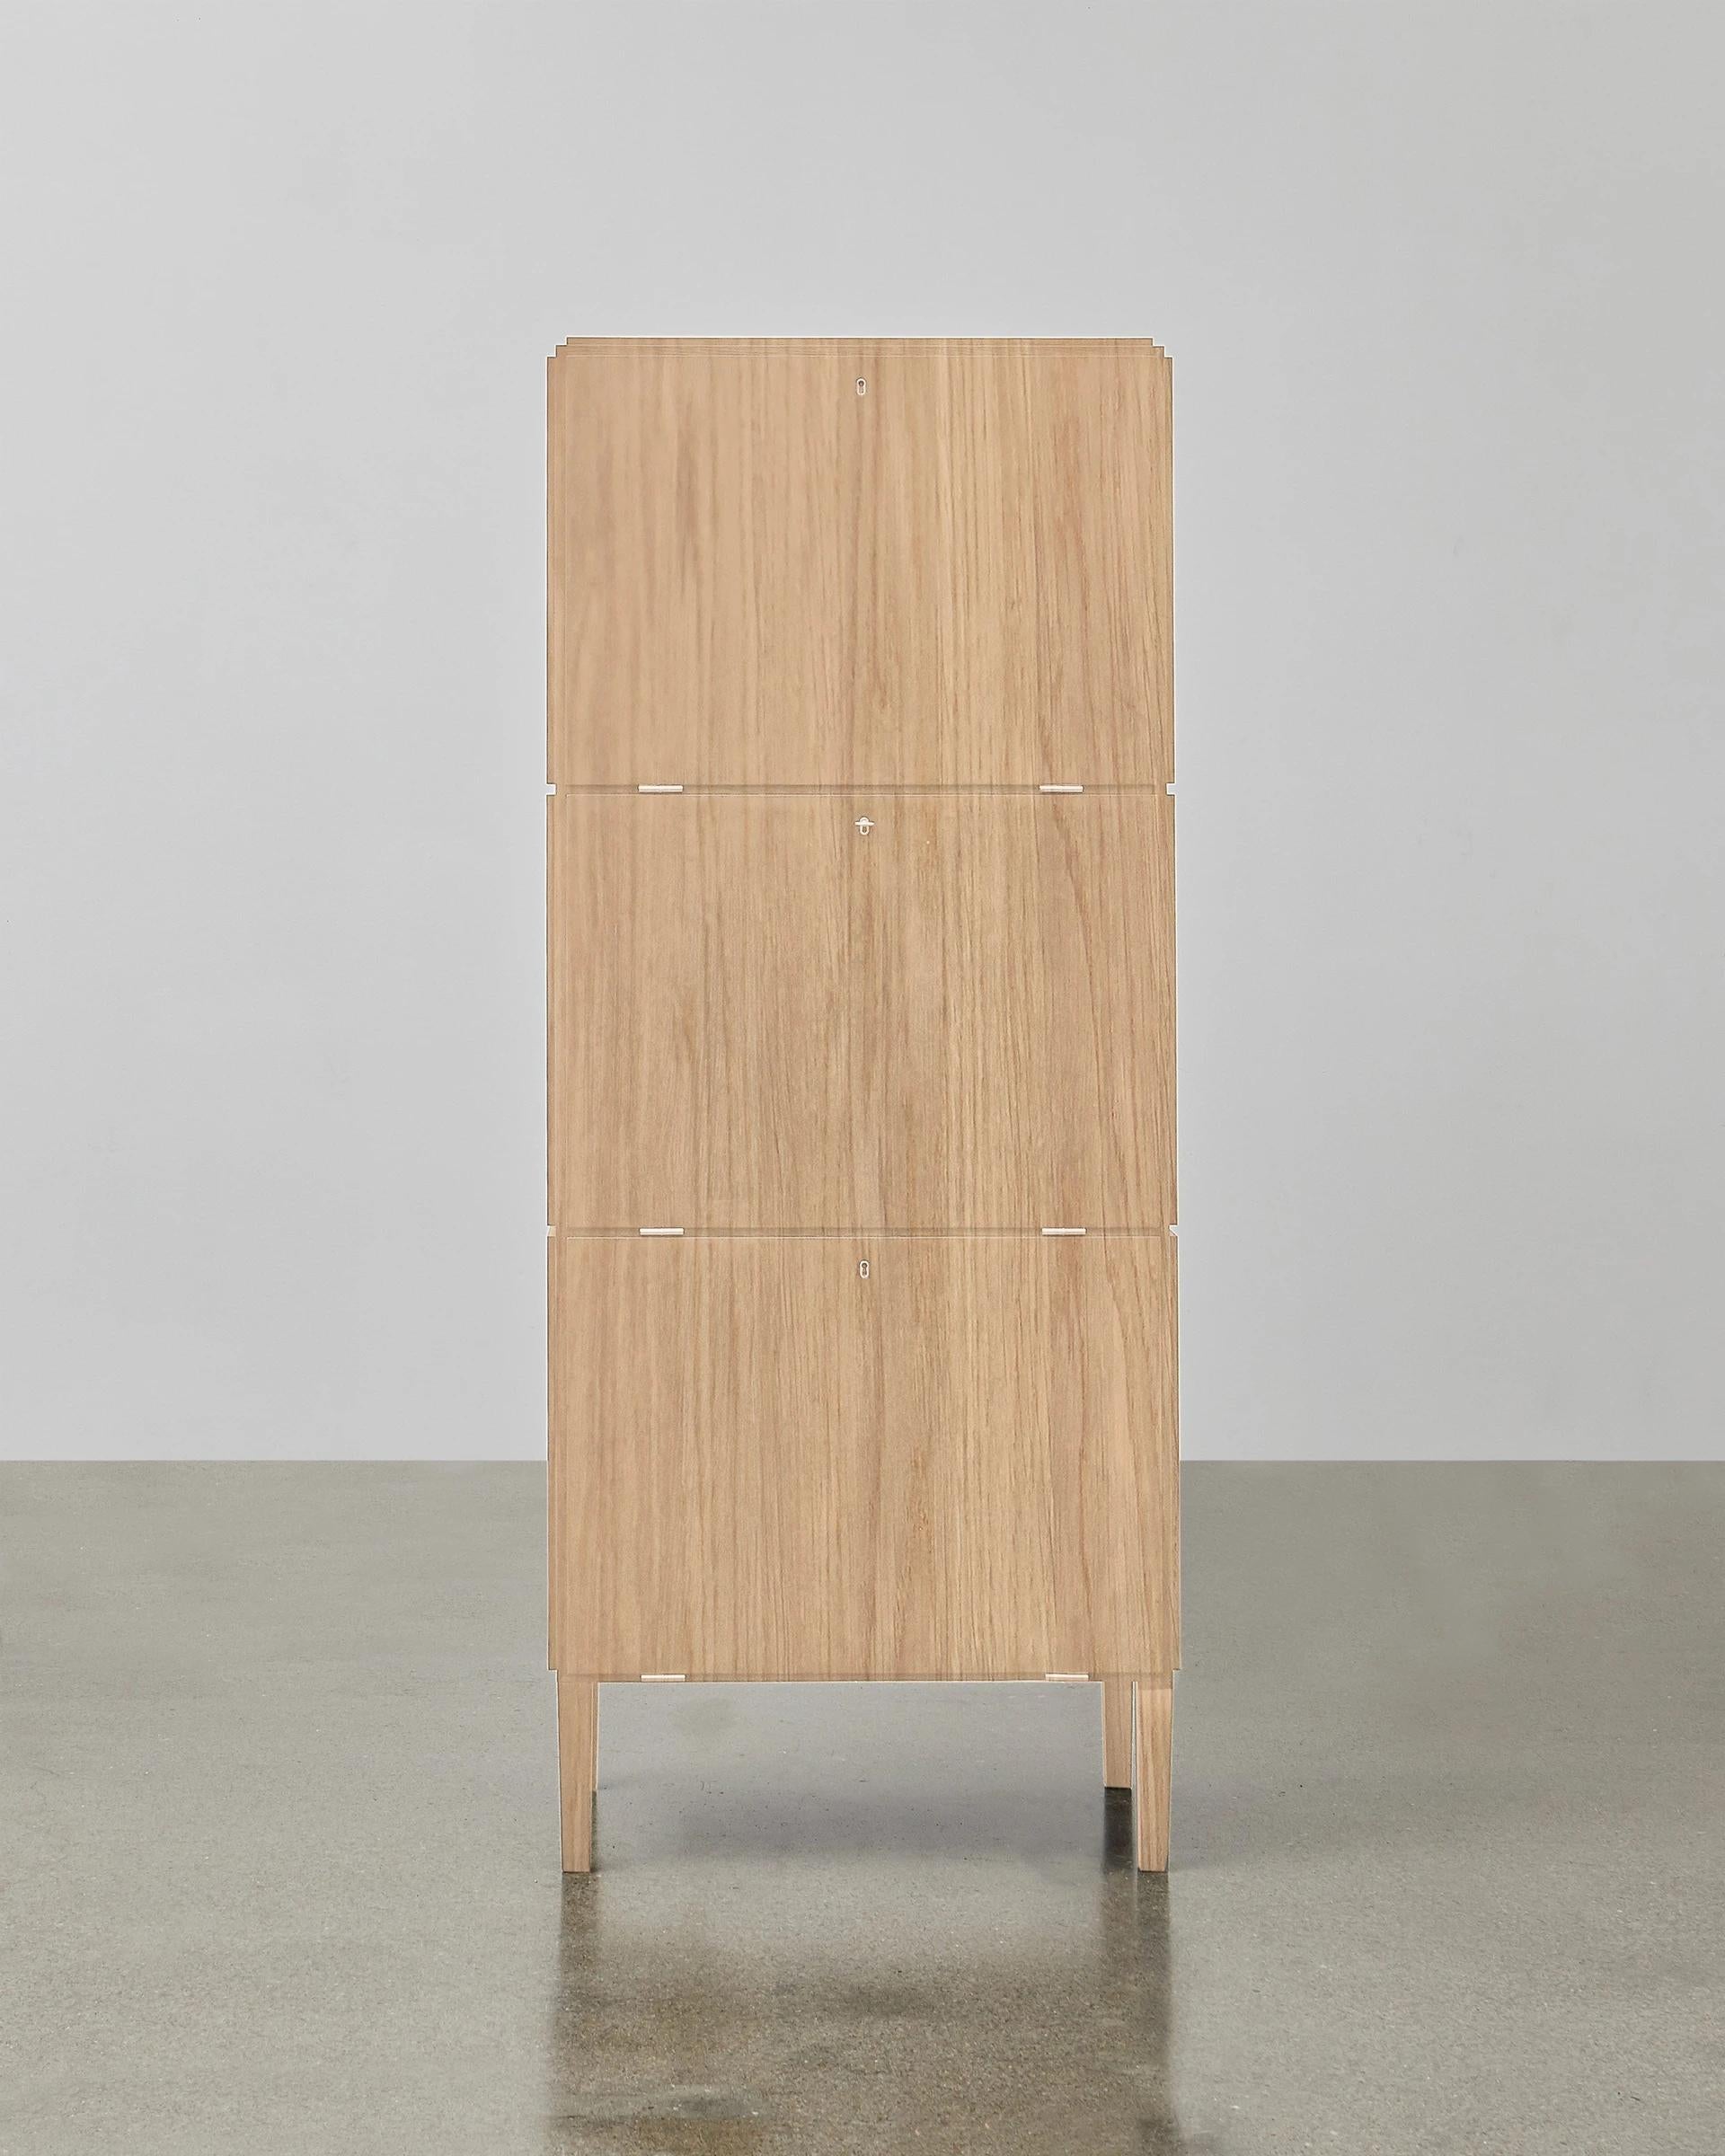 Constructed of clean lines in luxurious wood, the PH Cabinet is the perfect place to display precious mementoes. The PH Cabinet also features a highly practical element of three concealed storage compartments.

As with all PH Furniture, the PH